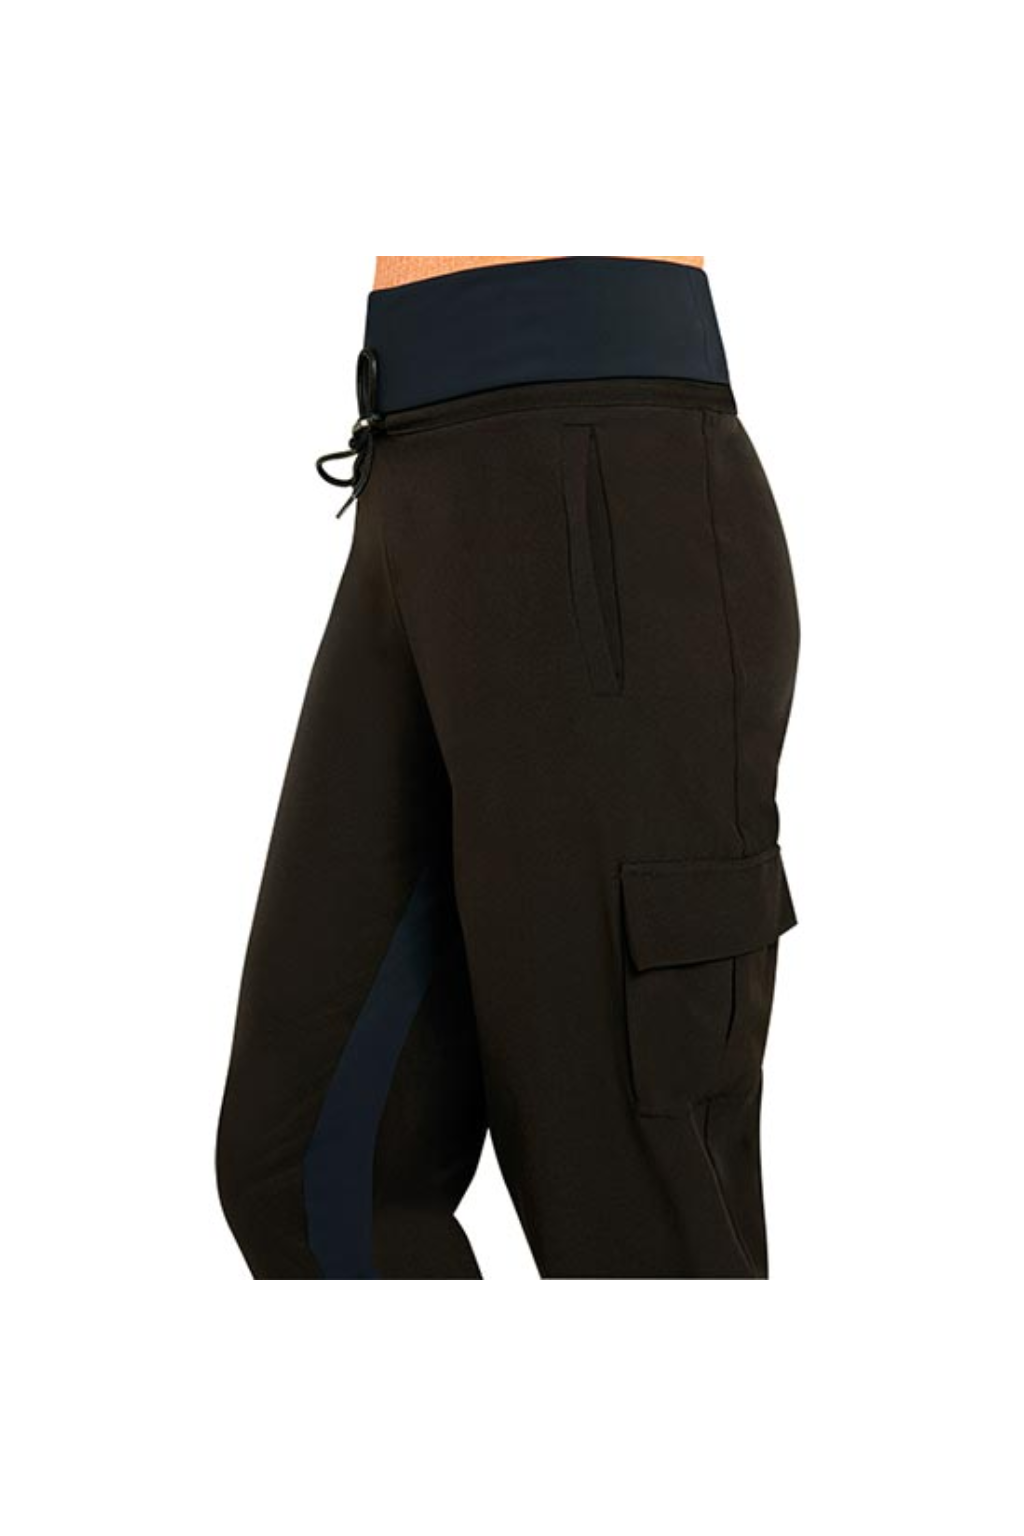 Extremely Comfortable Jogging Pants - METRO BRAZIL